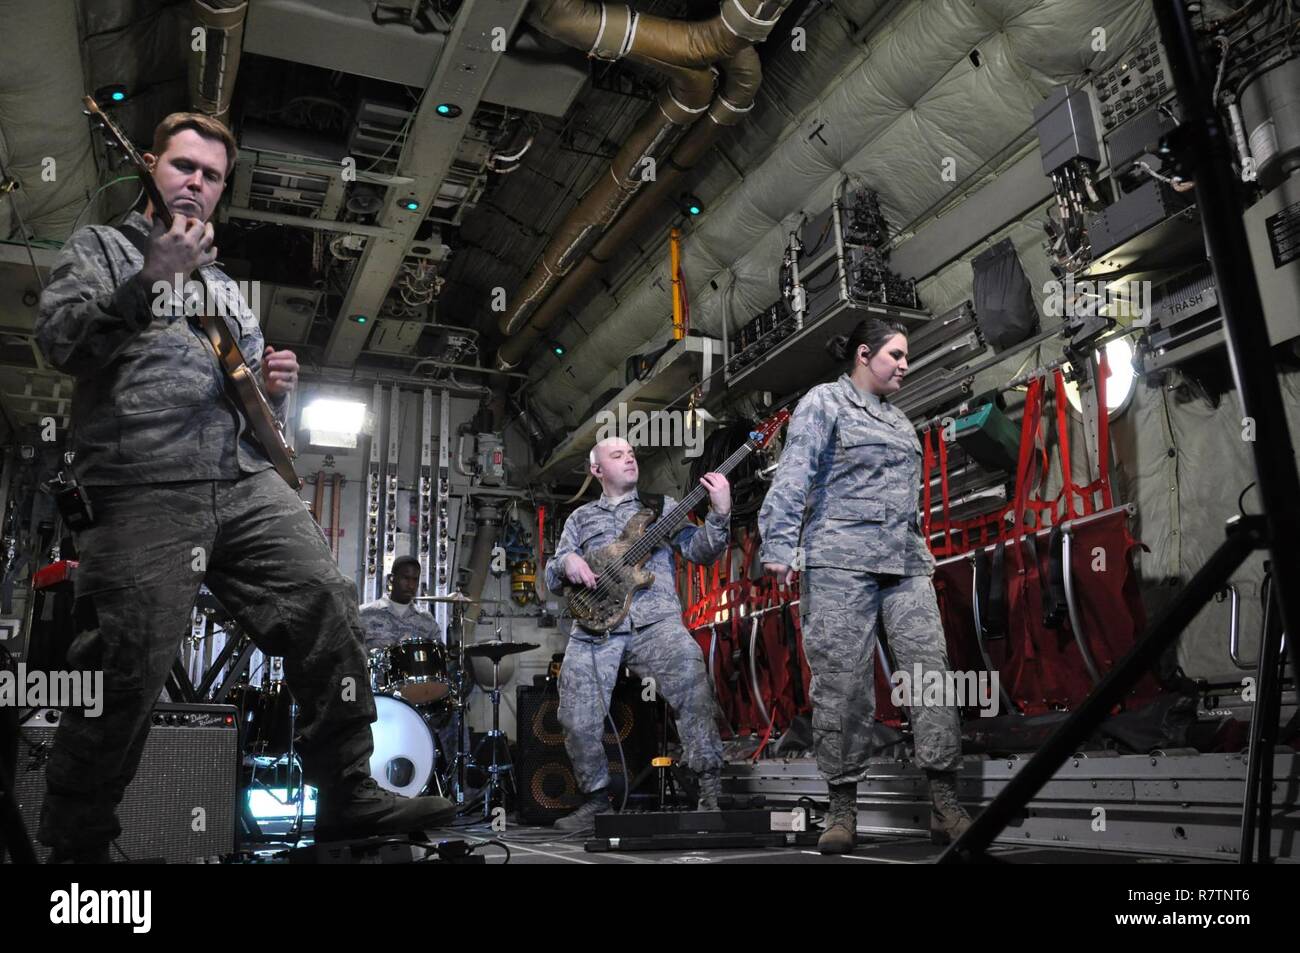 Members of the United States Air Force Academy Band’s, “Blue Steel,” perform inside an Air Force Reserve Command C-130 Hercules aircraft assigned to the 302nd Airlift Wing while recording scenes for their newest music video featuring the song “Fly Higher,” May 1, at Peterson Air Force Base, Colo. Pictured left to right are, Staff Sgts. Joe Gacioch, guitarist, Quincy Brown, drummer, Colin Trusedell, bassist, and Airman 1st Class Danielle Diaz, vocalist. Stock Photo